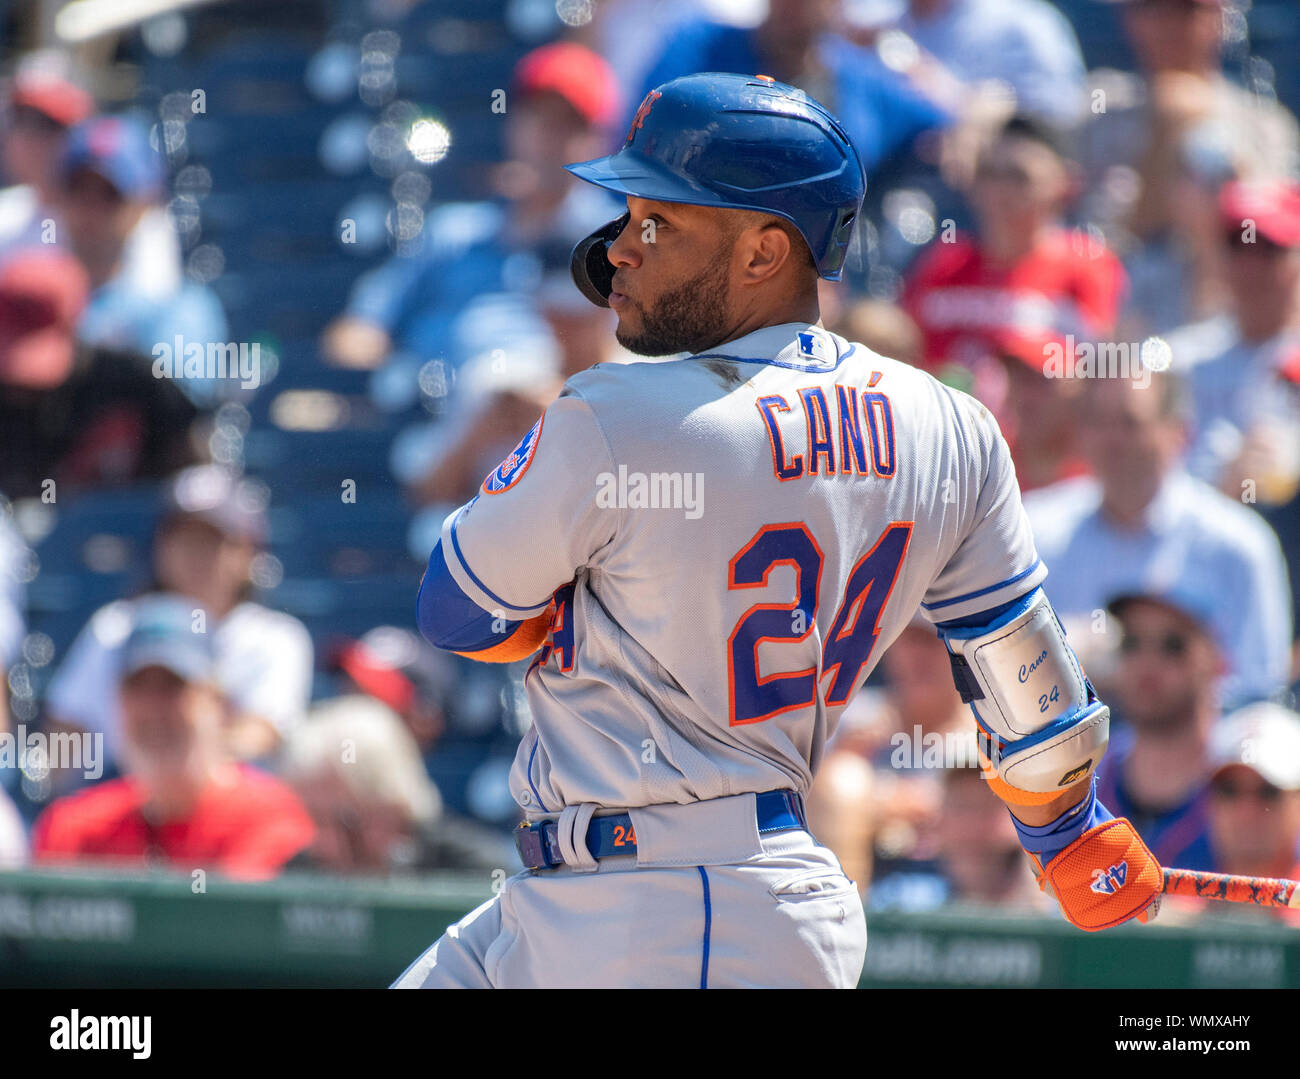 Washington, United States Of America. 04th Sep, 2019. New York Mets infielder Robinson Cano (24) bats in the second inning against the Washington Nationals at Nationals Park in Washington, DC on Wednesday, September 4, 2019. Credit: Ron Sachs/CNP (RESTRICTION: NO New York or New Jersey Newspapers or newspapers within a 75 mile radius of New York City) | usage worldwide Credit: dpa/Alamy Live News Stock Photo